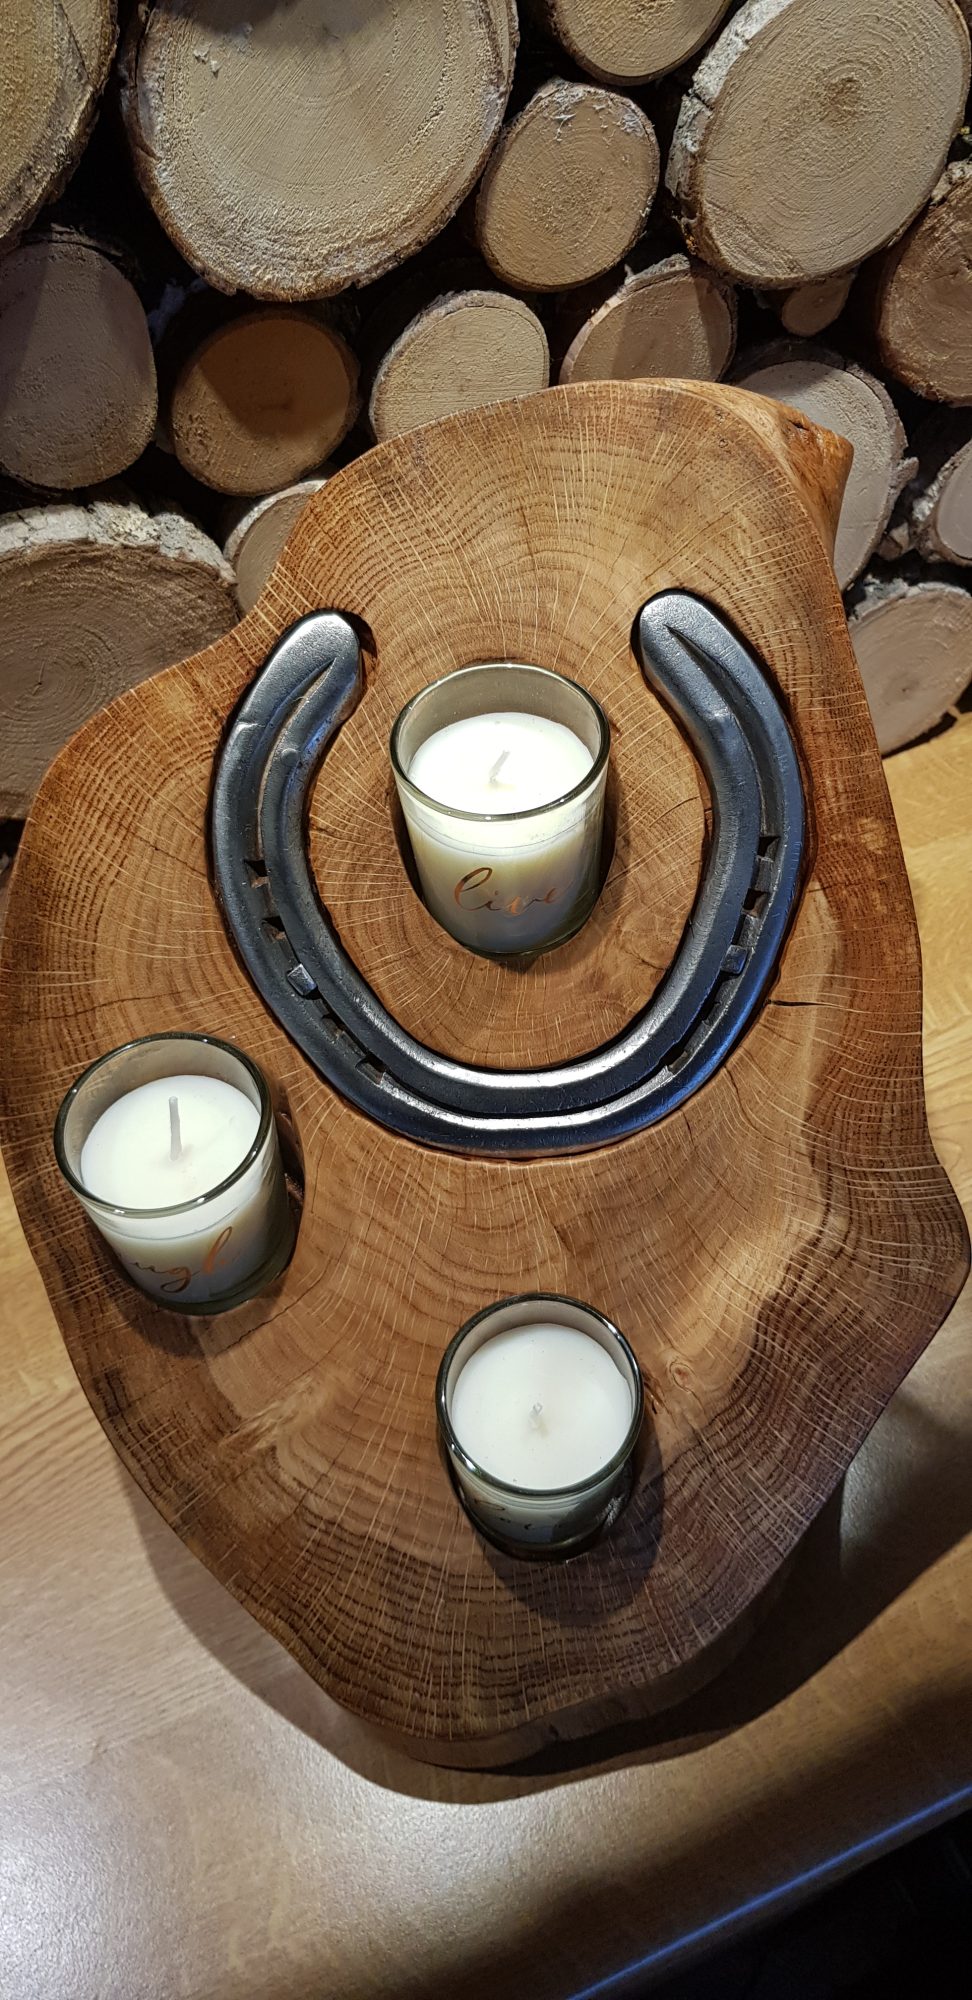 Candle & Tealight holders